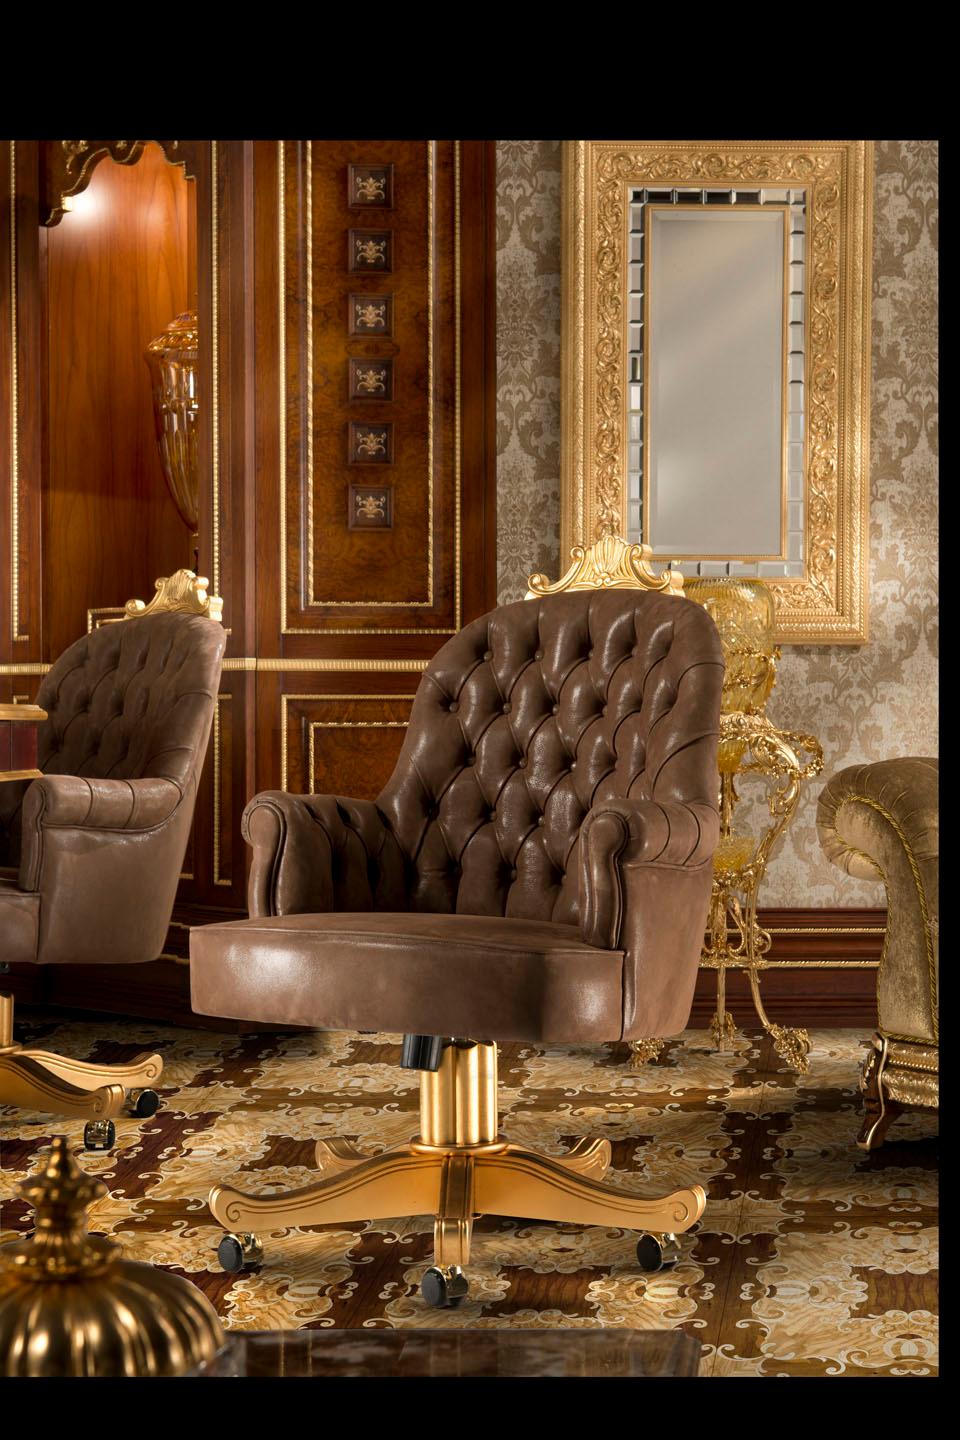 This Modenese Gastone Interiors custom item has been designed and produced for top managers and company owners. Its unique authority and quality materials represent the perfect solution for leading figures. The chair structure is made of top-level